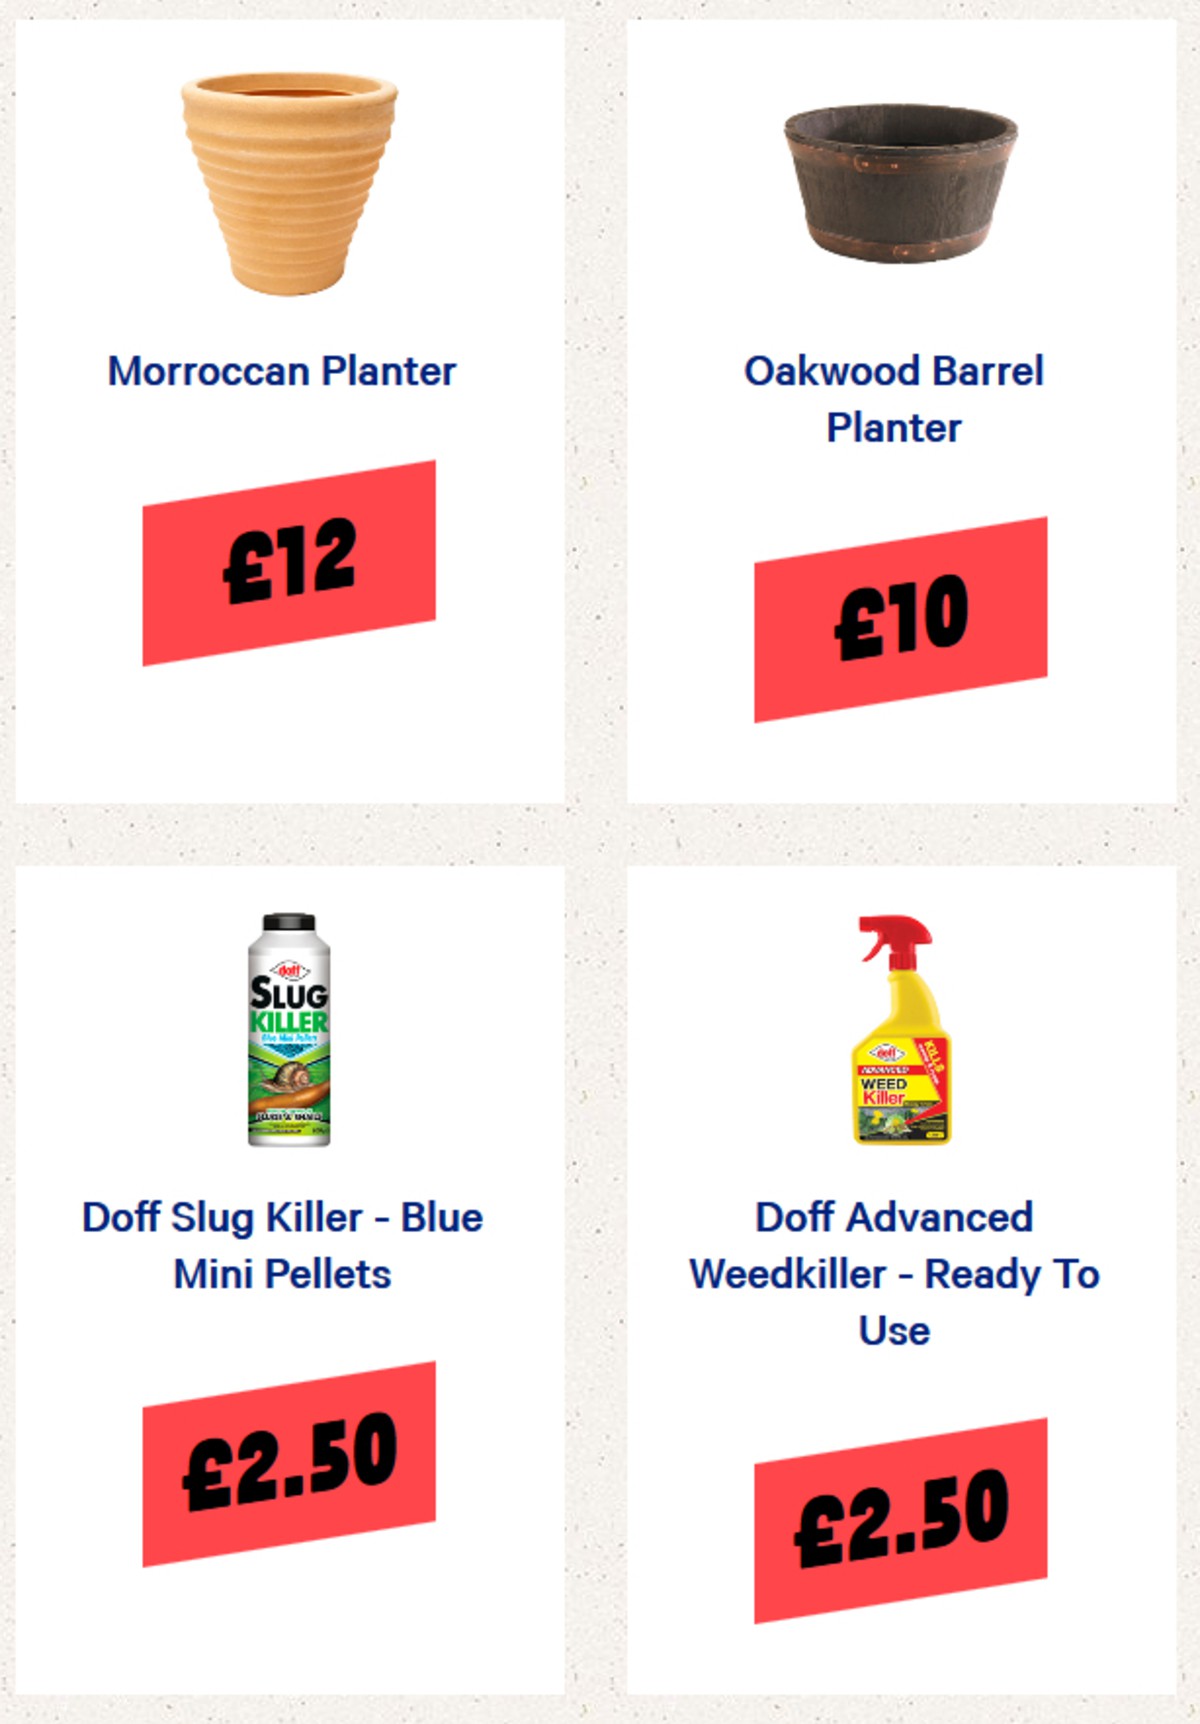 Jack's Offers from 3 April